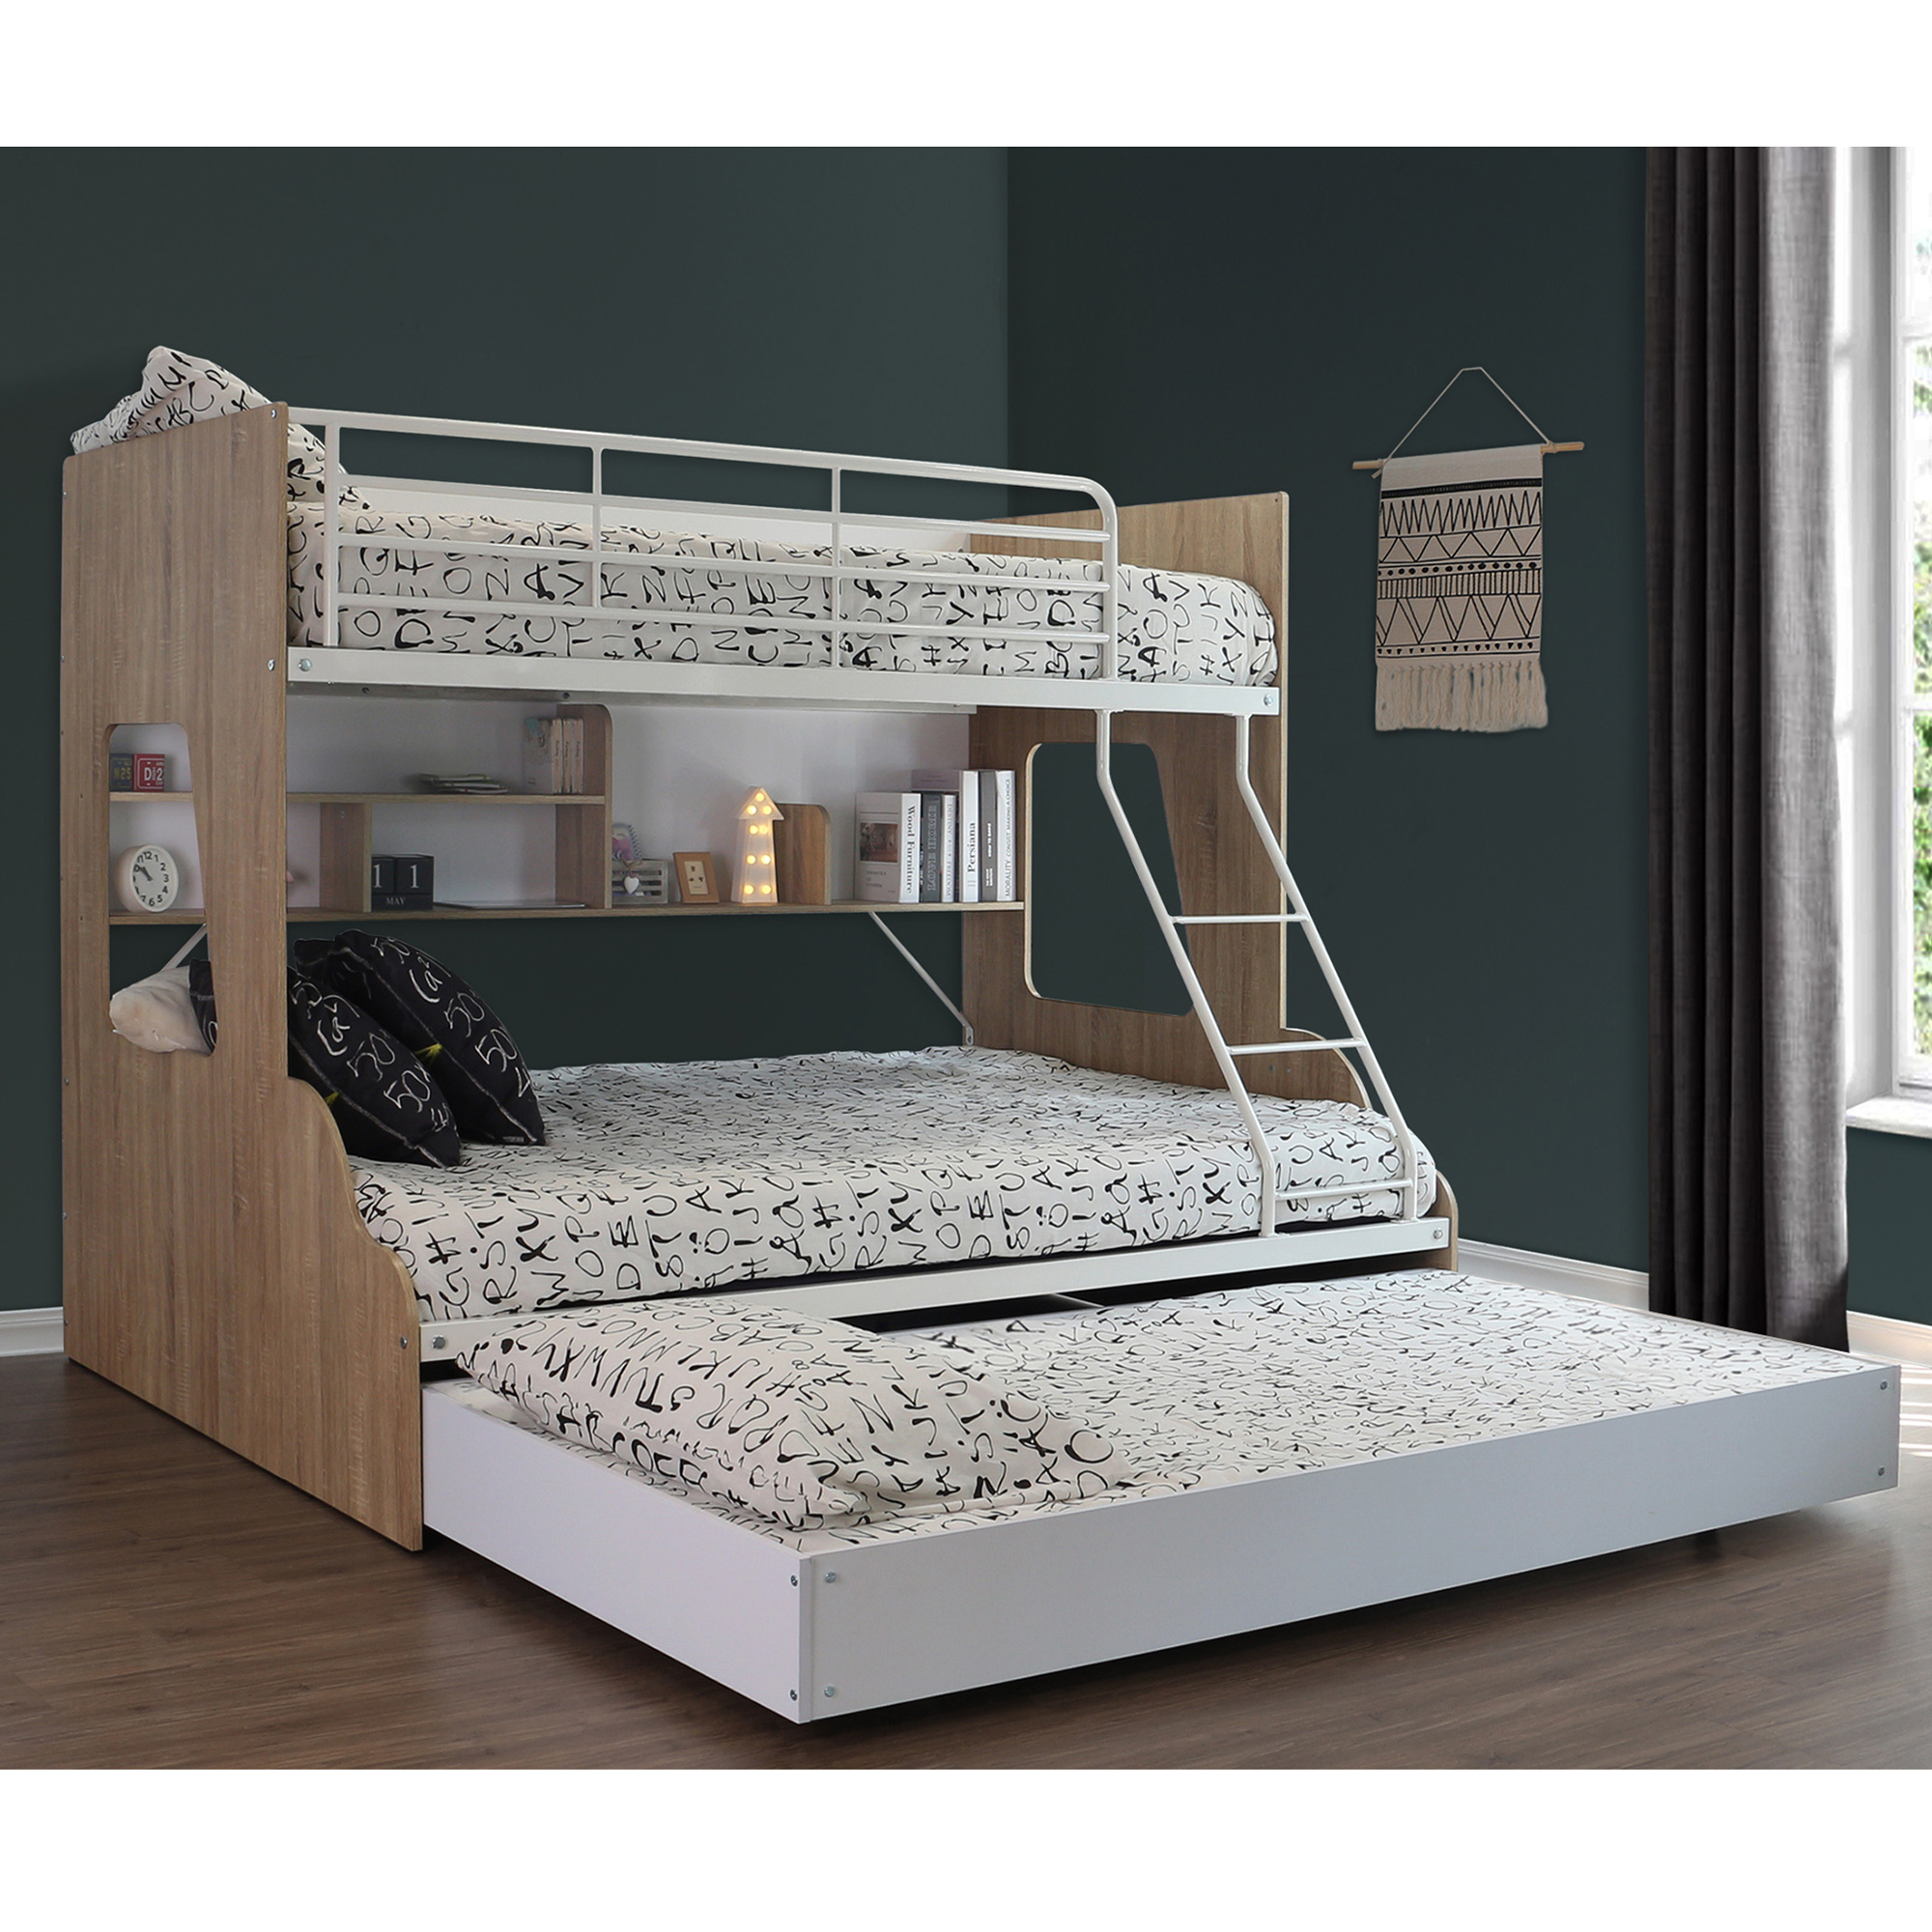 Single Over Double Trio Bunk Bed, Small Single Bunk Beds